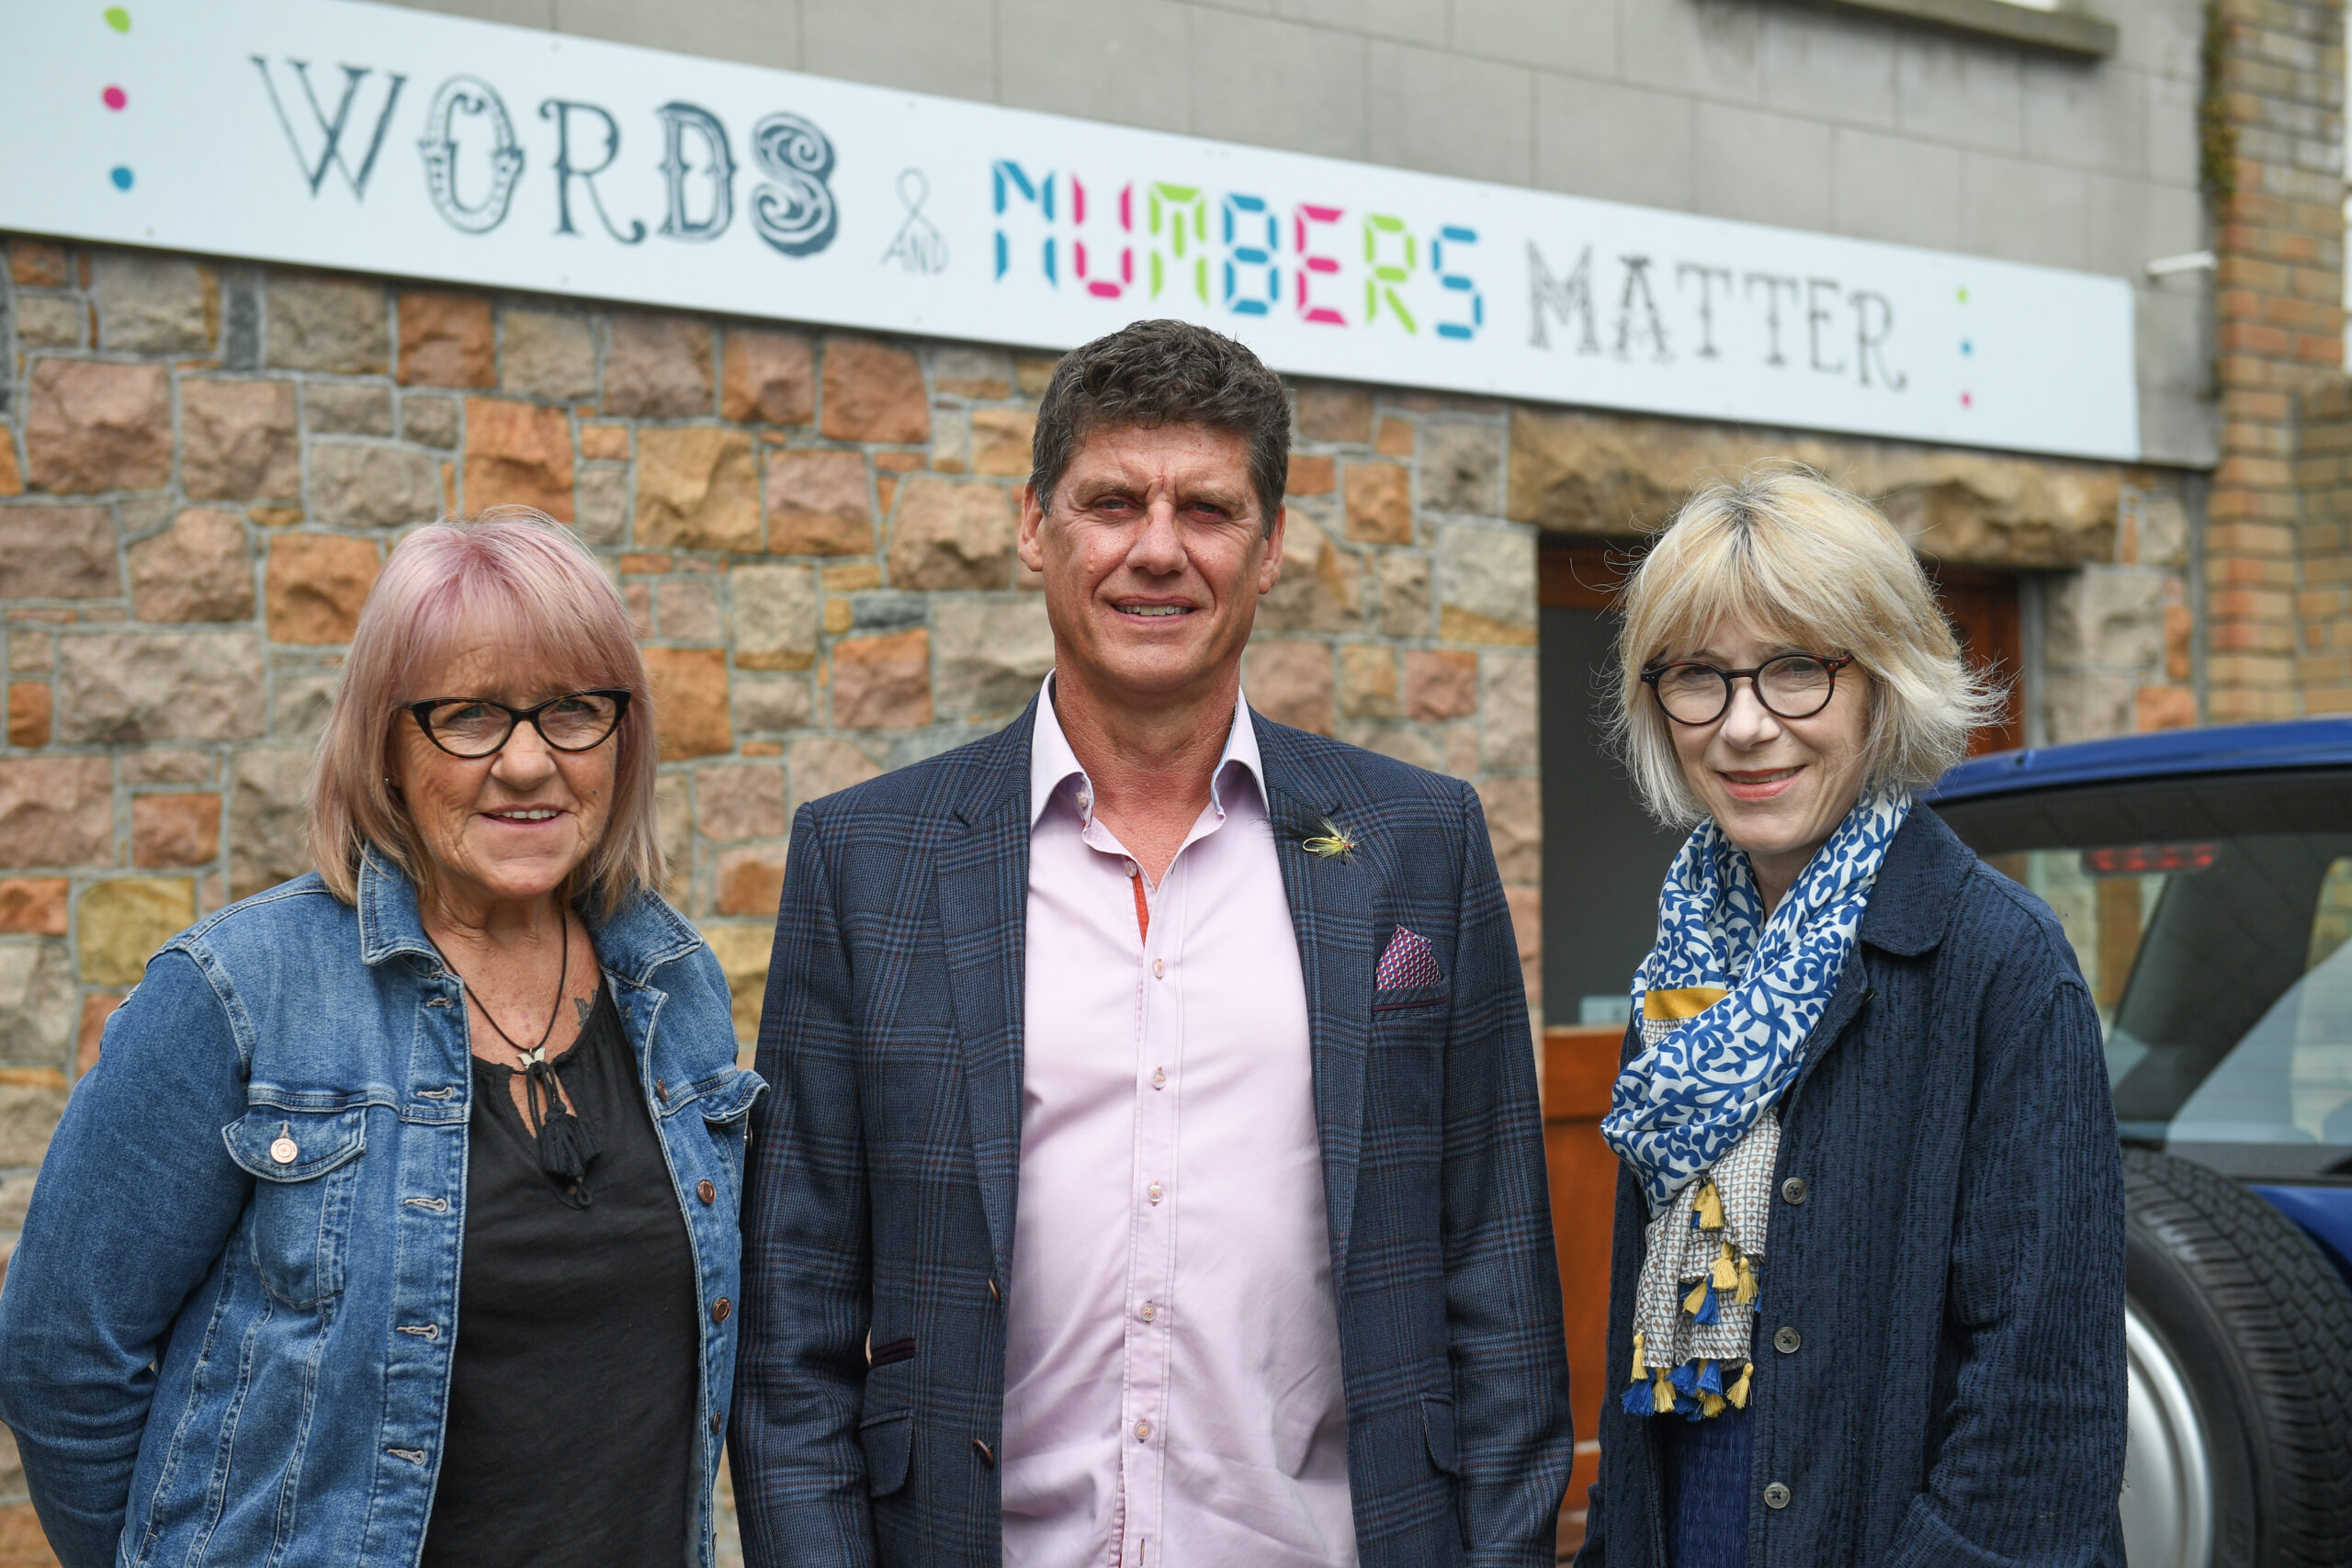 Words and Numbers Matter team